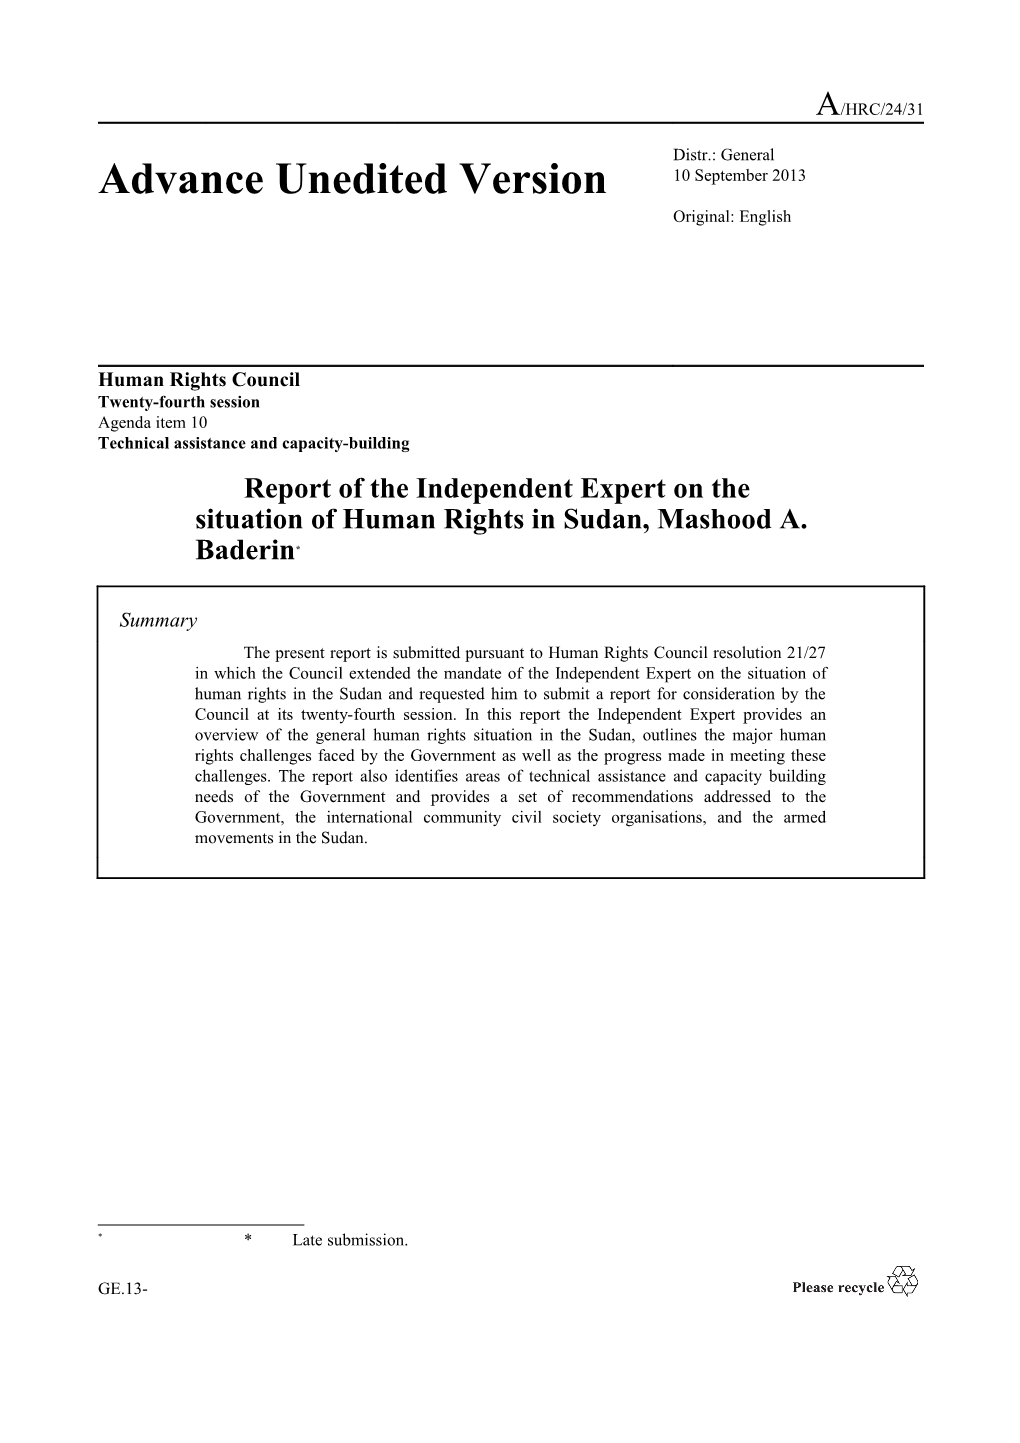 Report of the Independent Expert on the Situation of Human Rights in Sudan